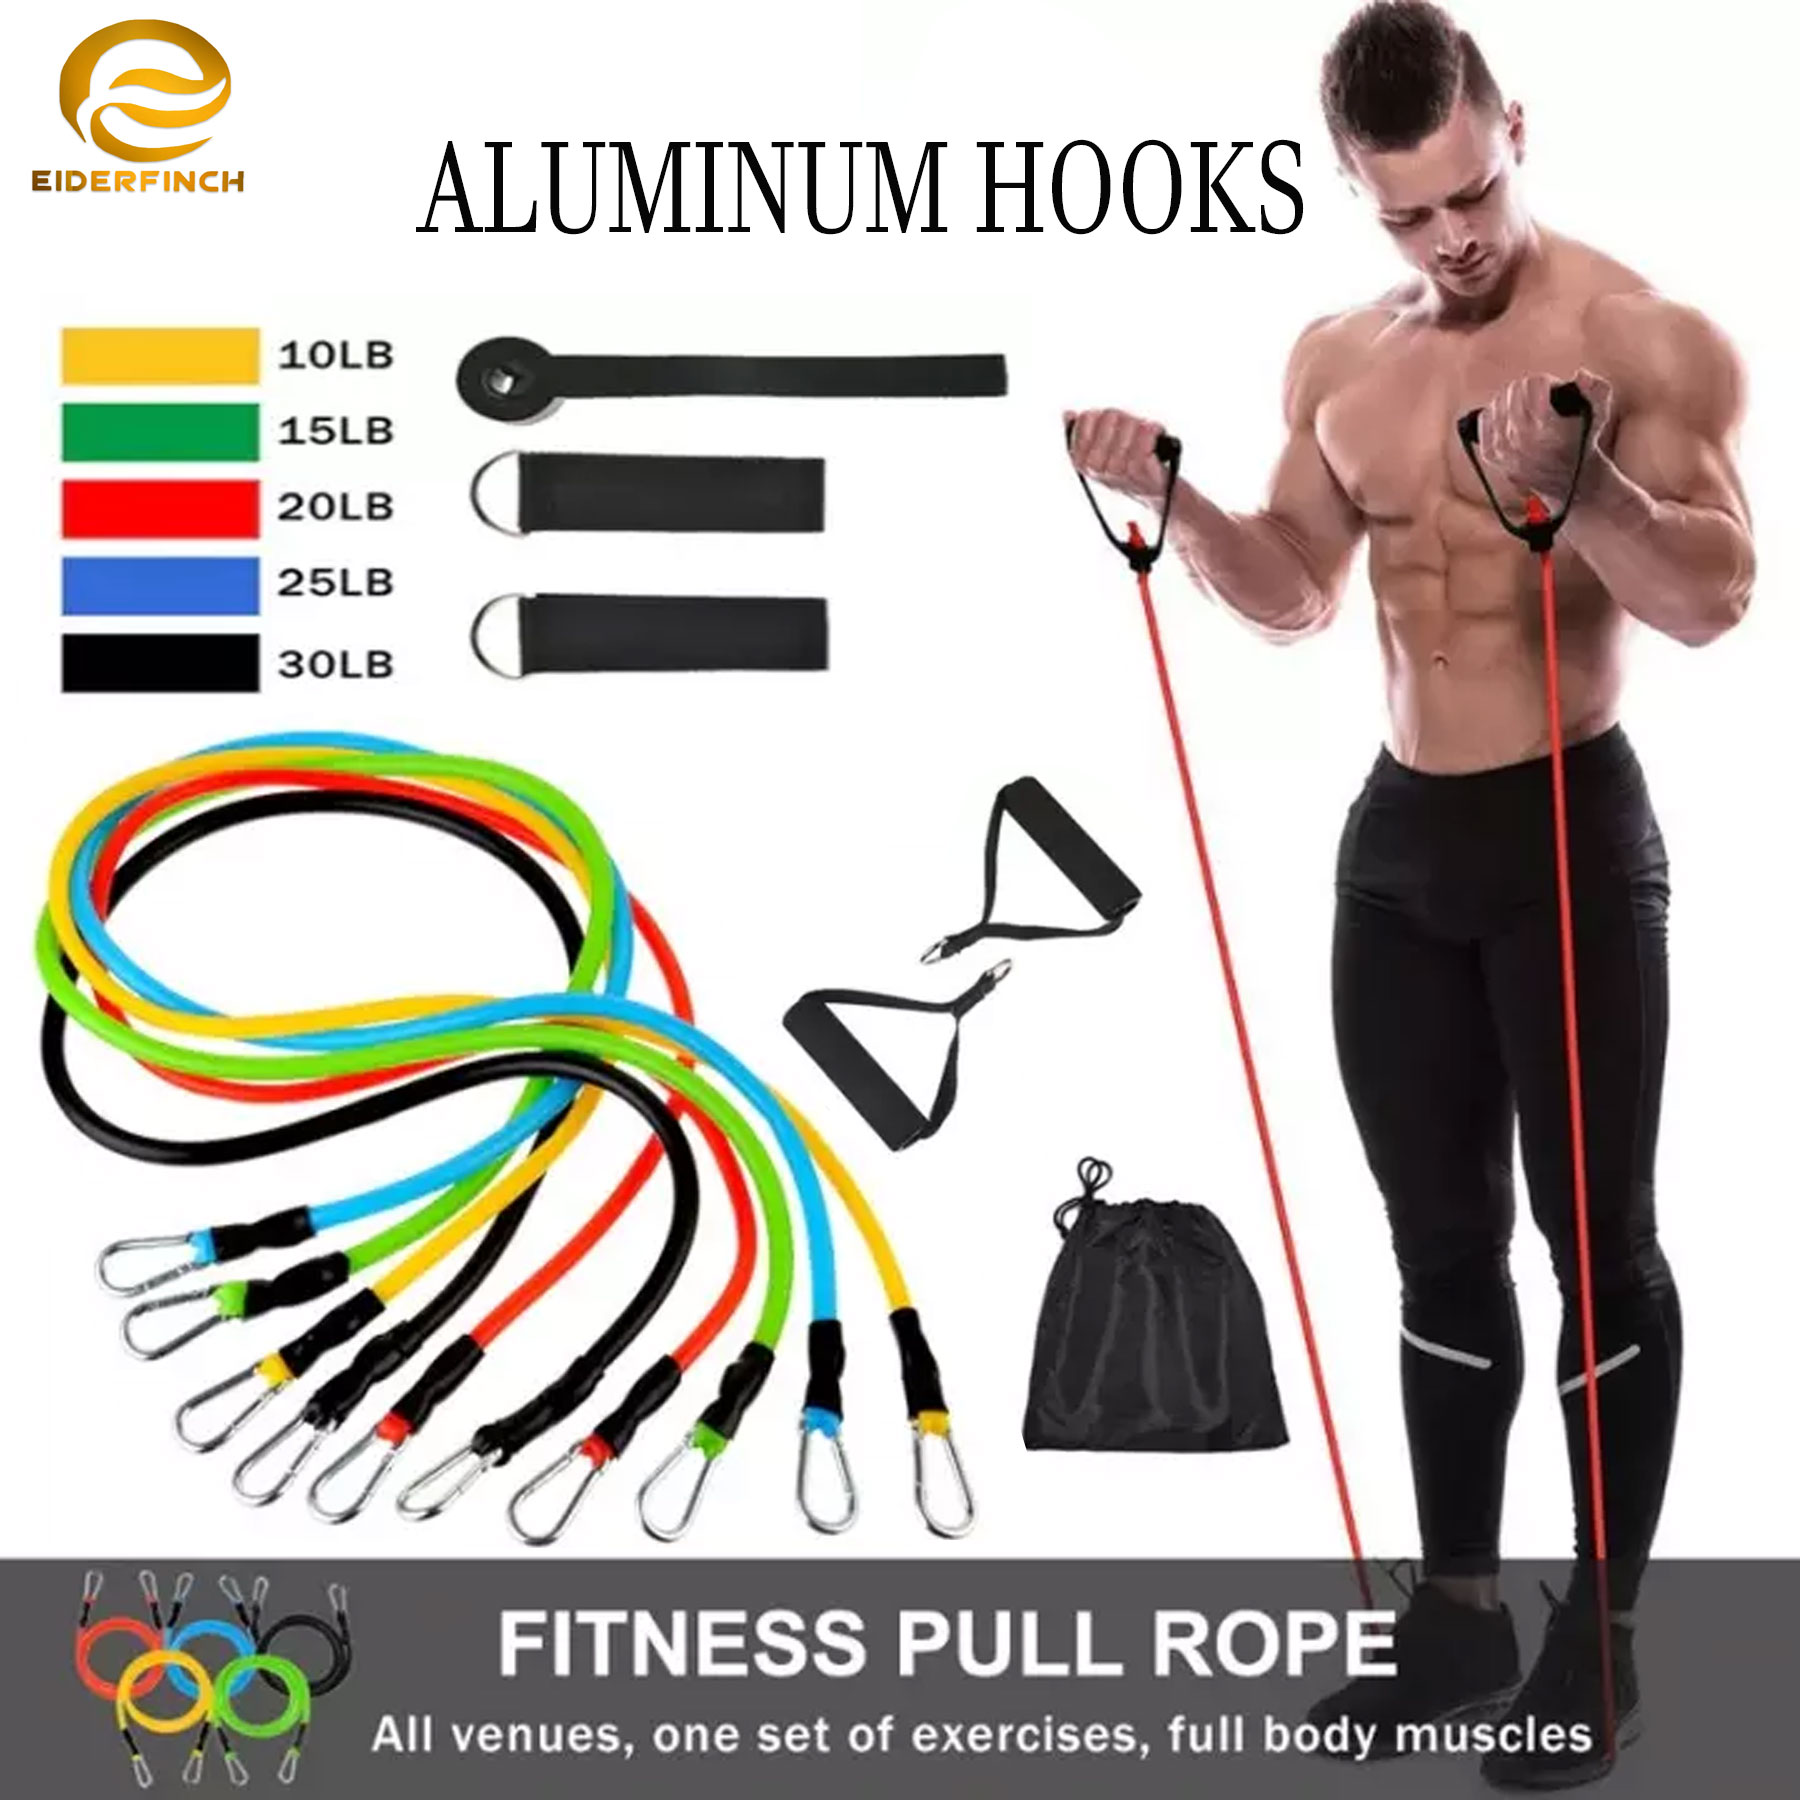 12x Resistance Bands Set Fitness Tube Pull Rope Workout Exercise Training Band 